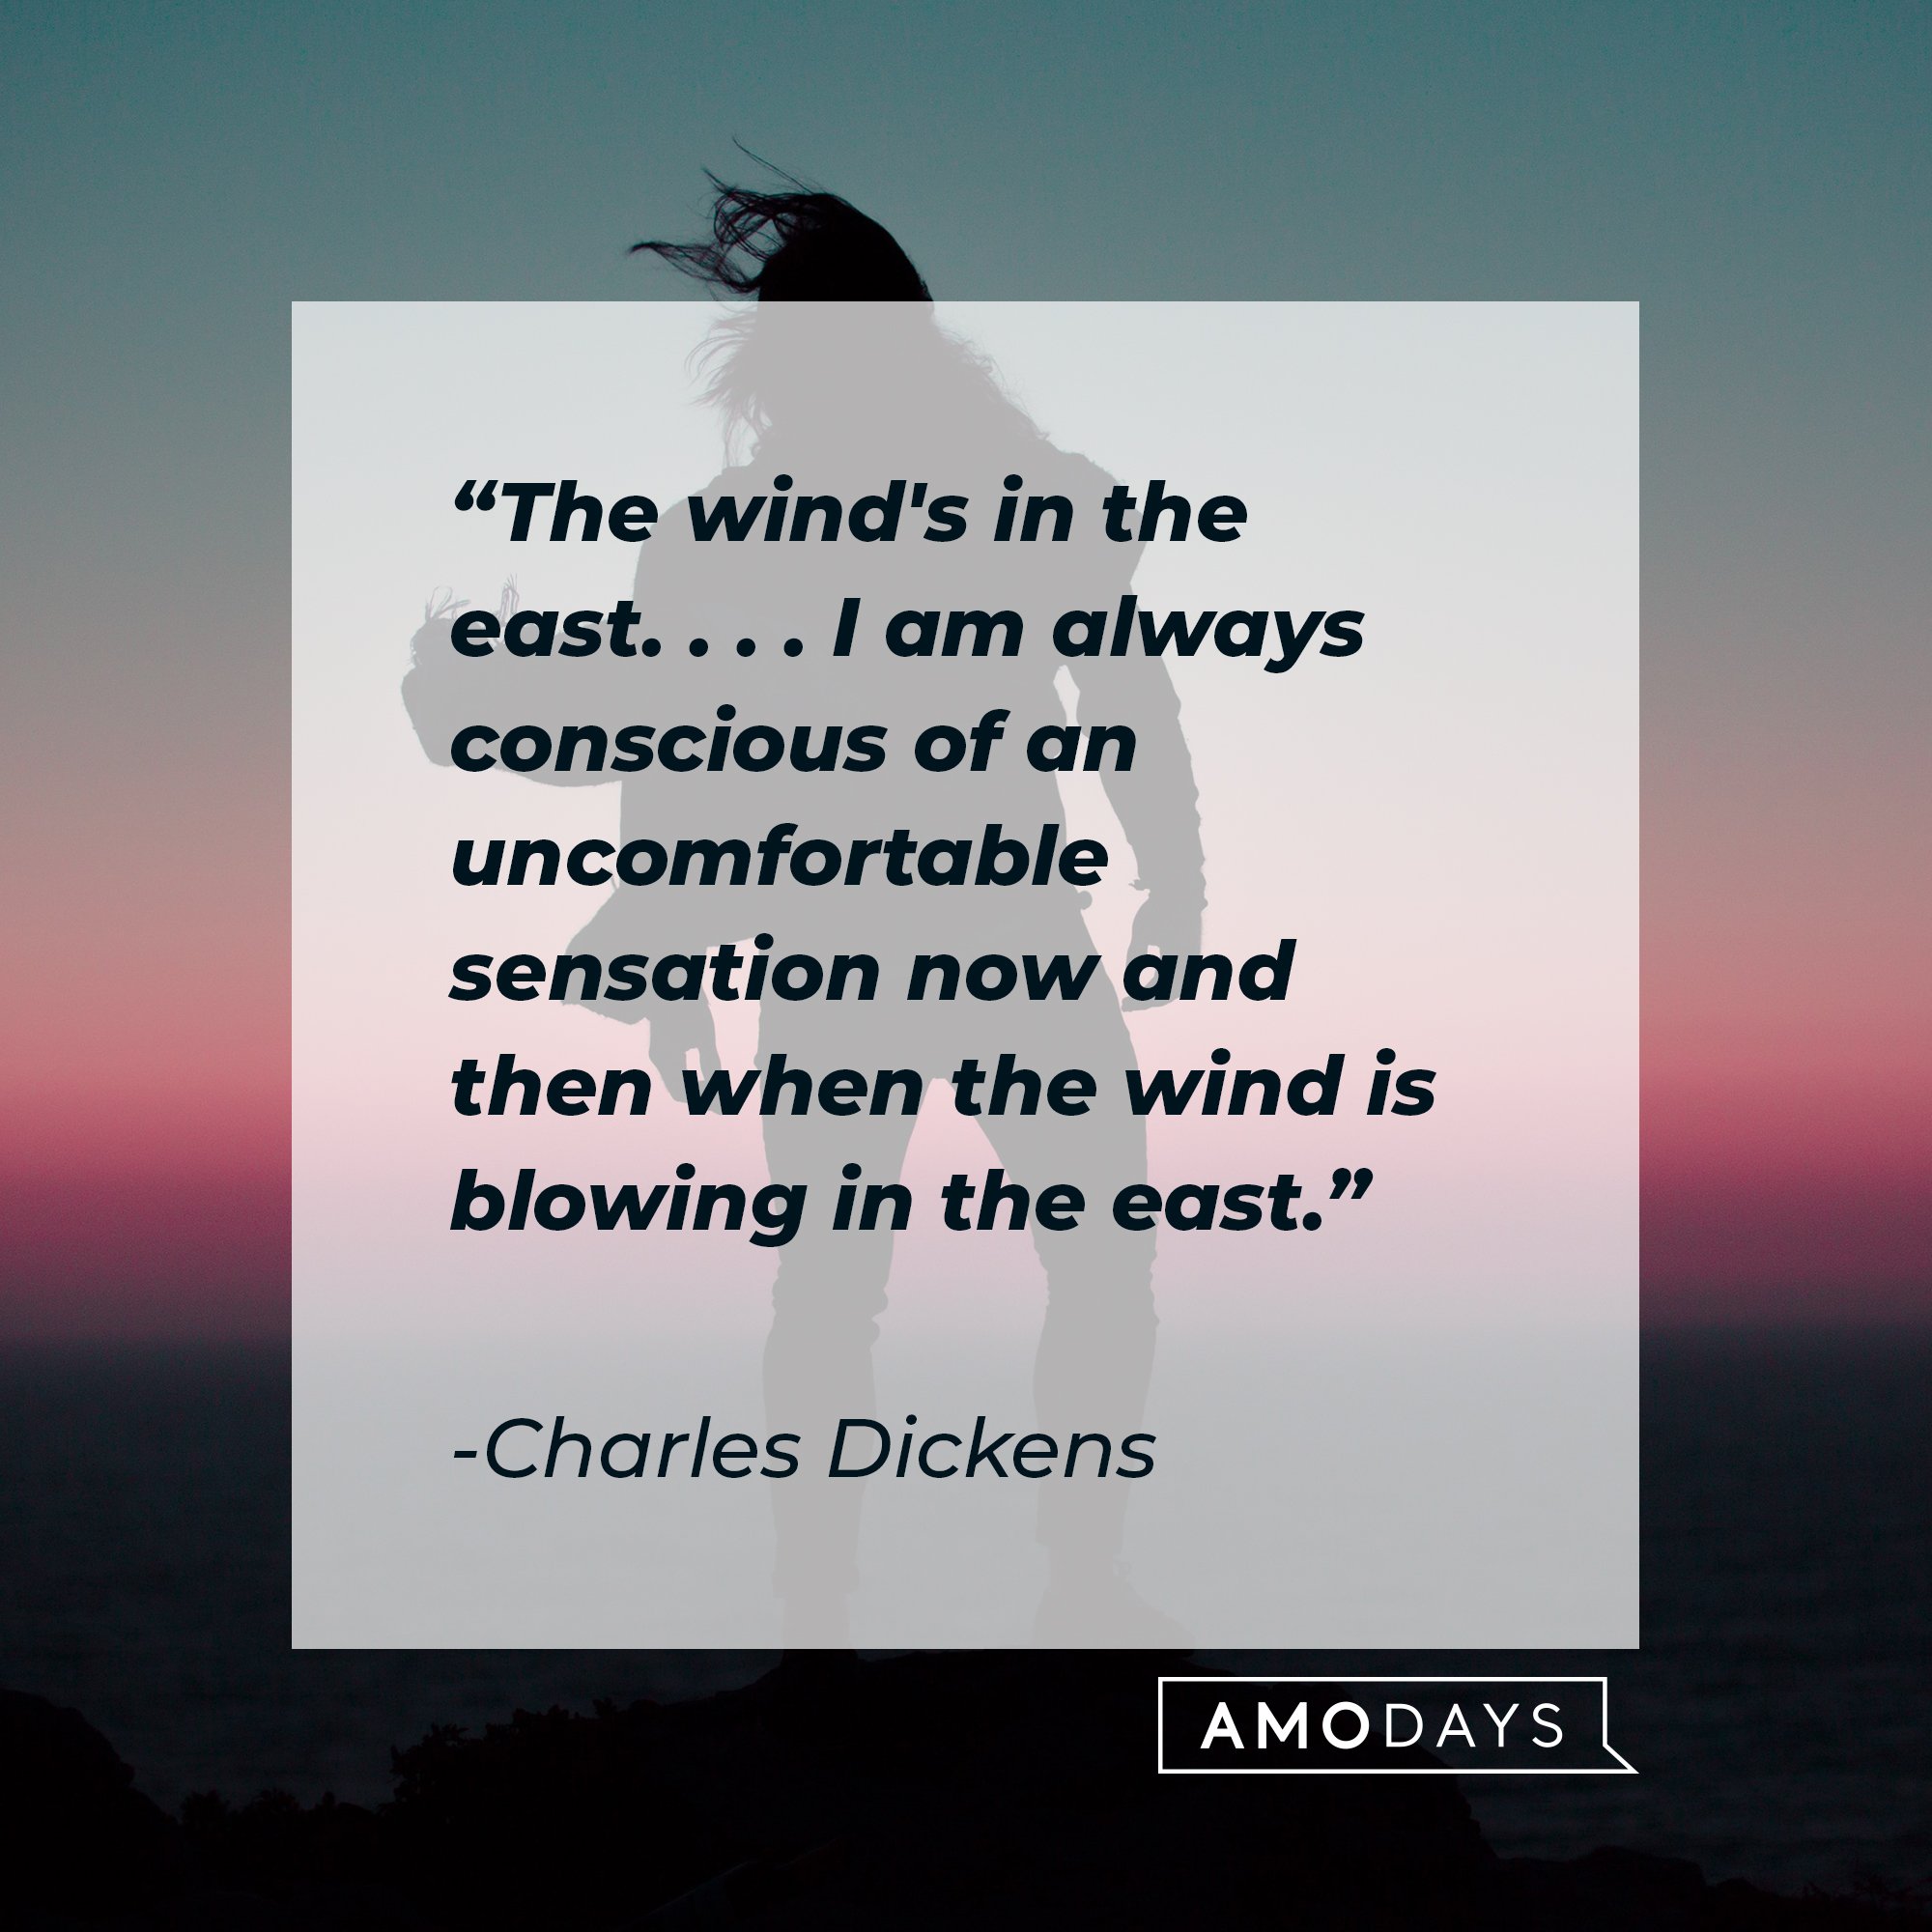 Charles Dickens' quote: "The wind's in the east. . . . I am always conscious of an uncomfortable sensation now and then when the wind is blowing in the east." | Image: AmoDays